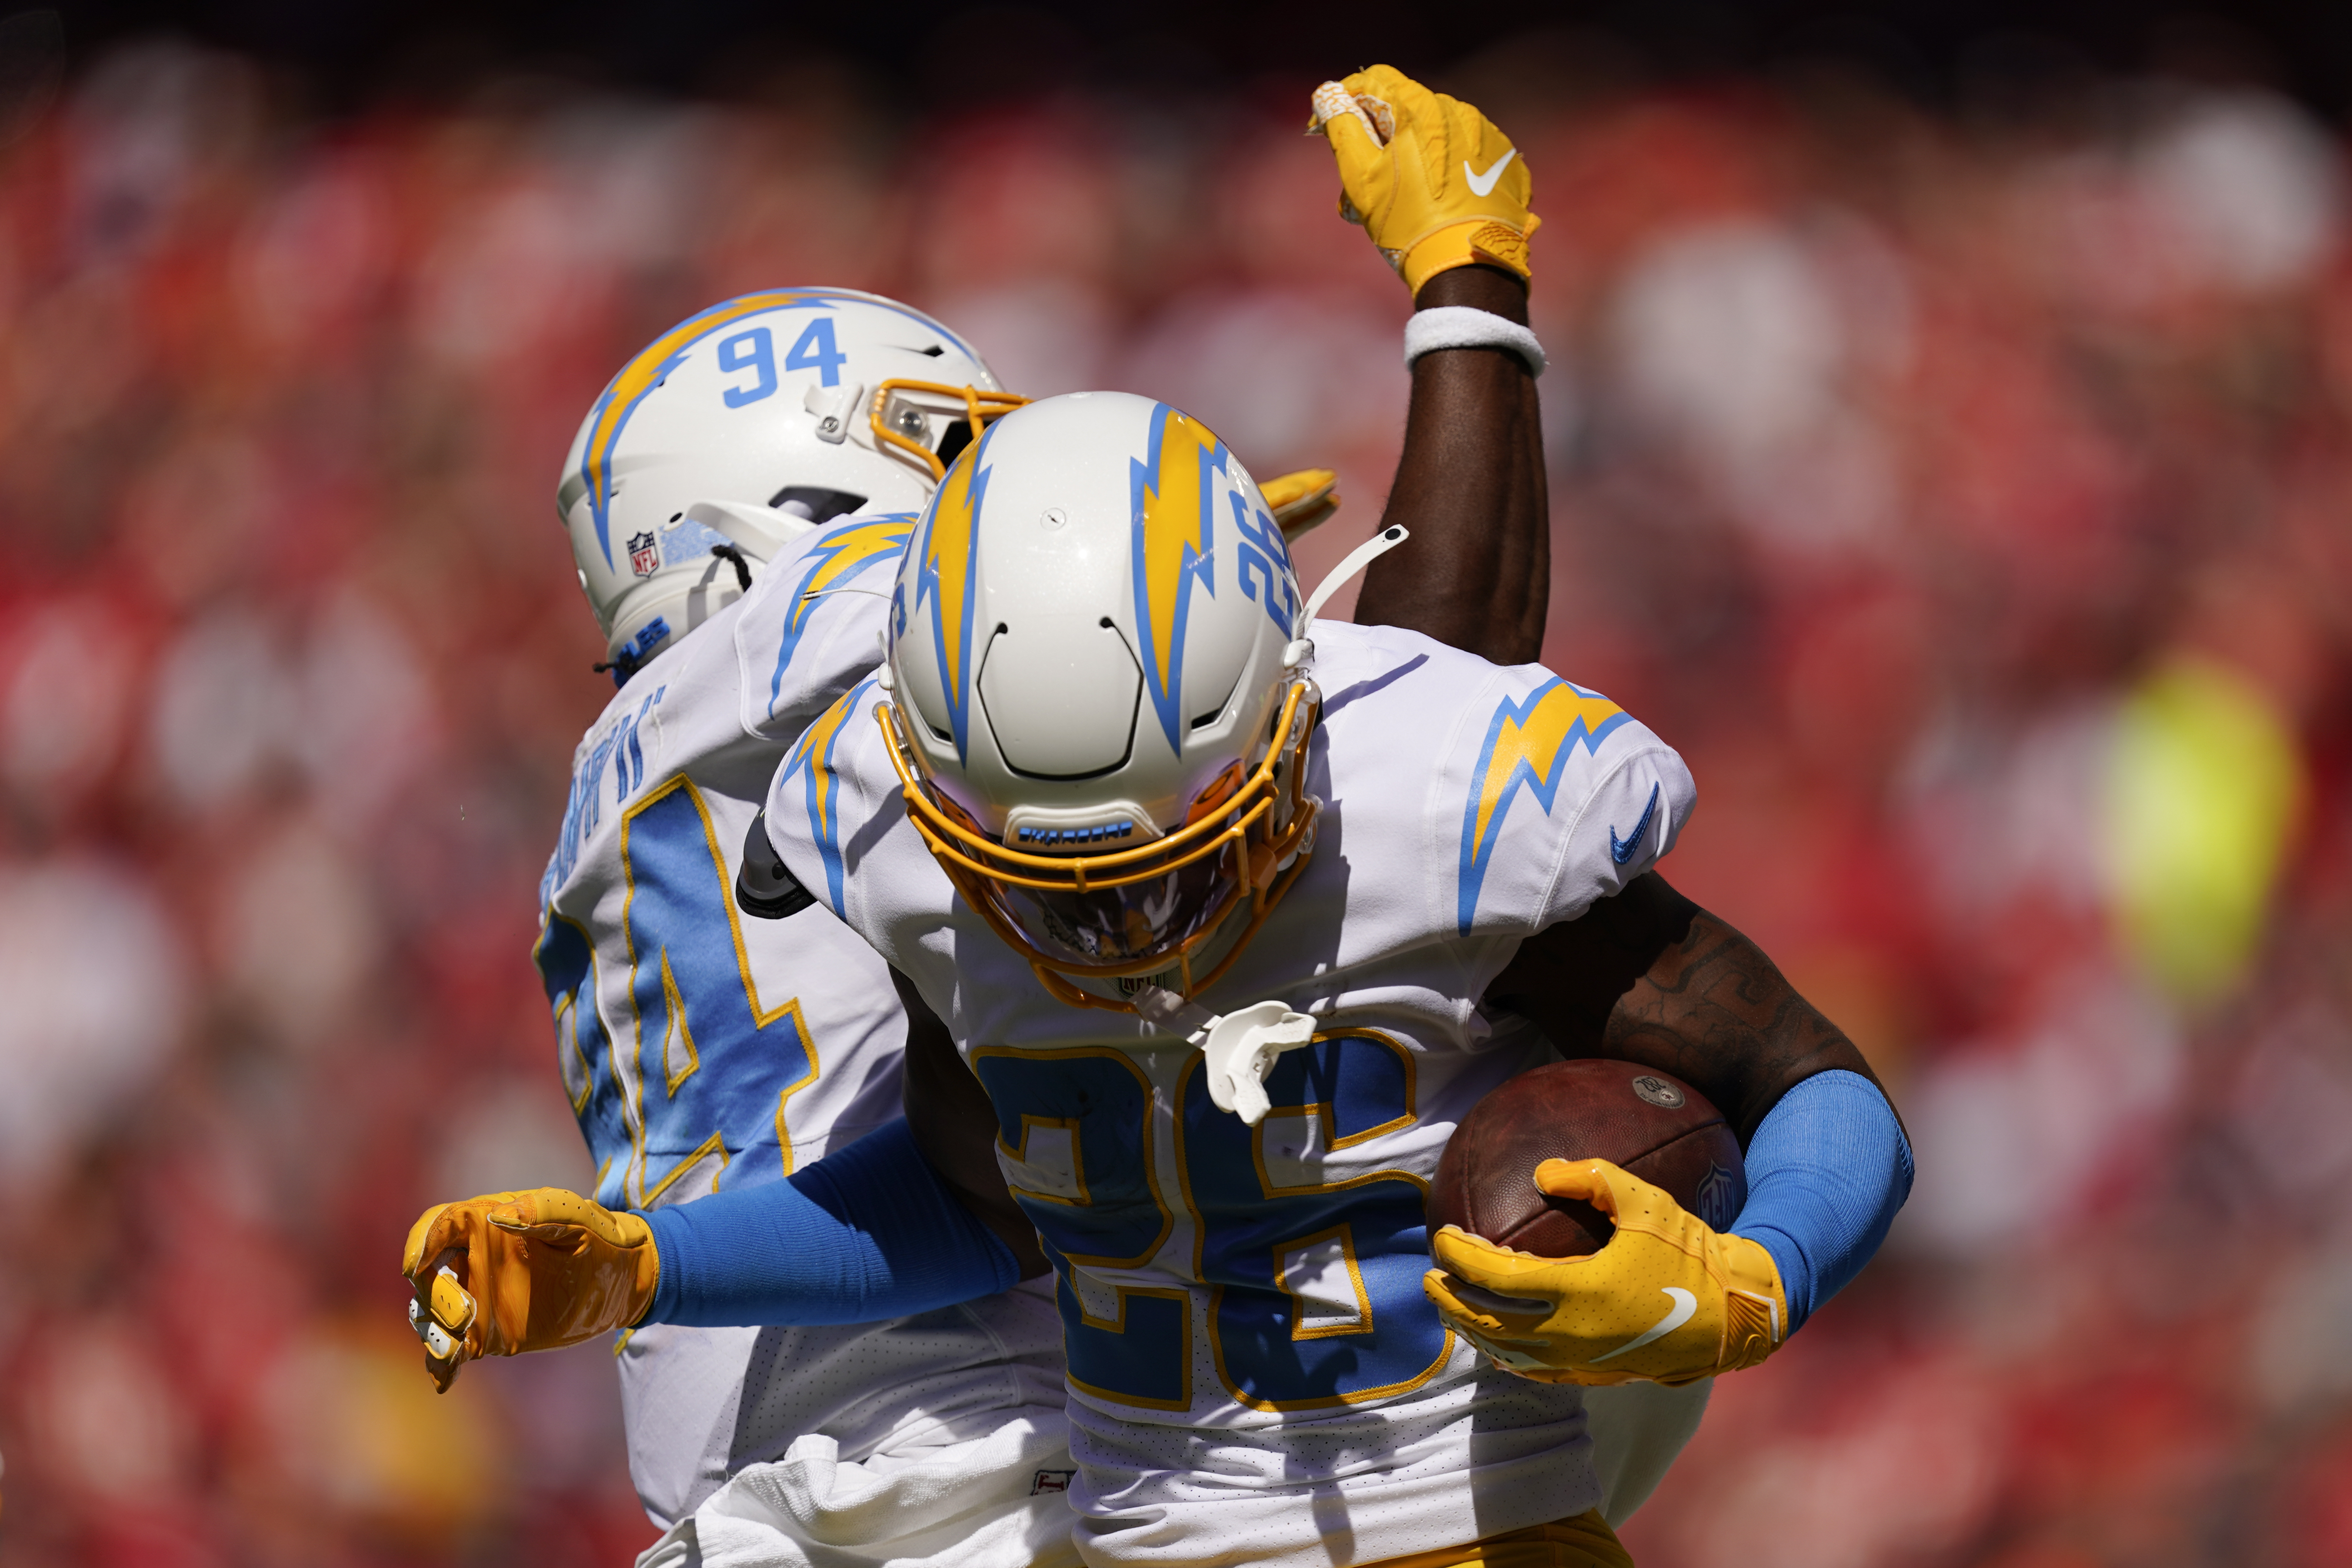 Chargers rally to beat turnover-prone Chiefs 30-24 in KC